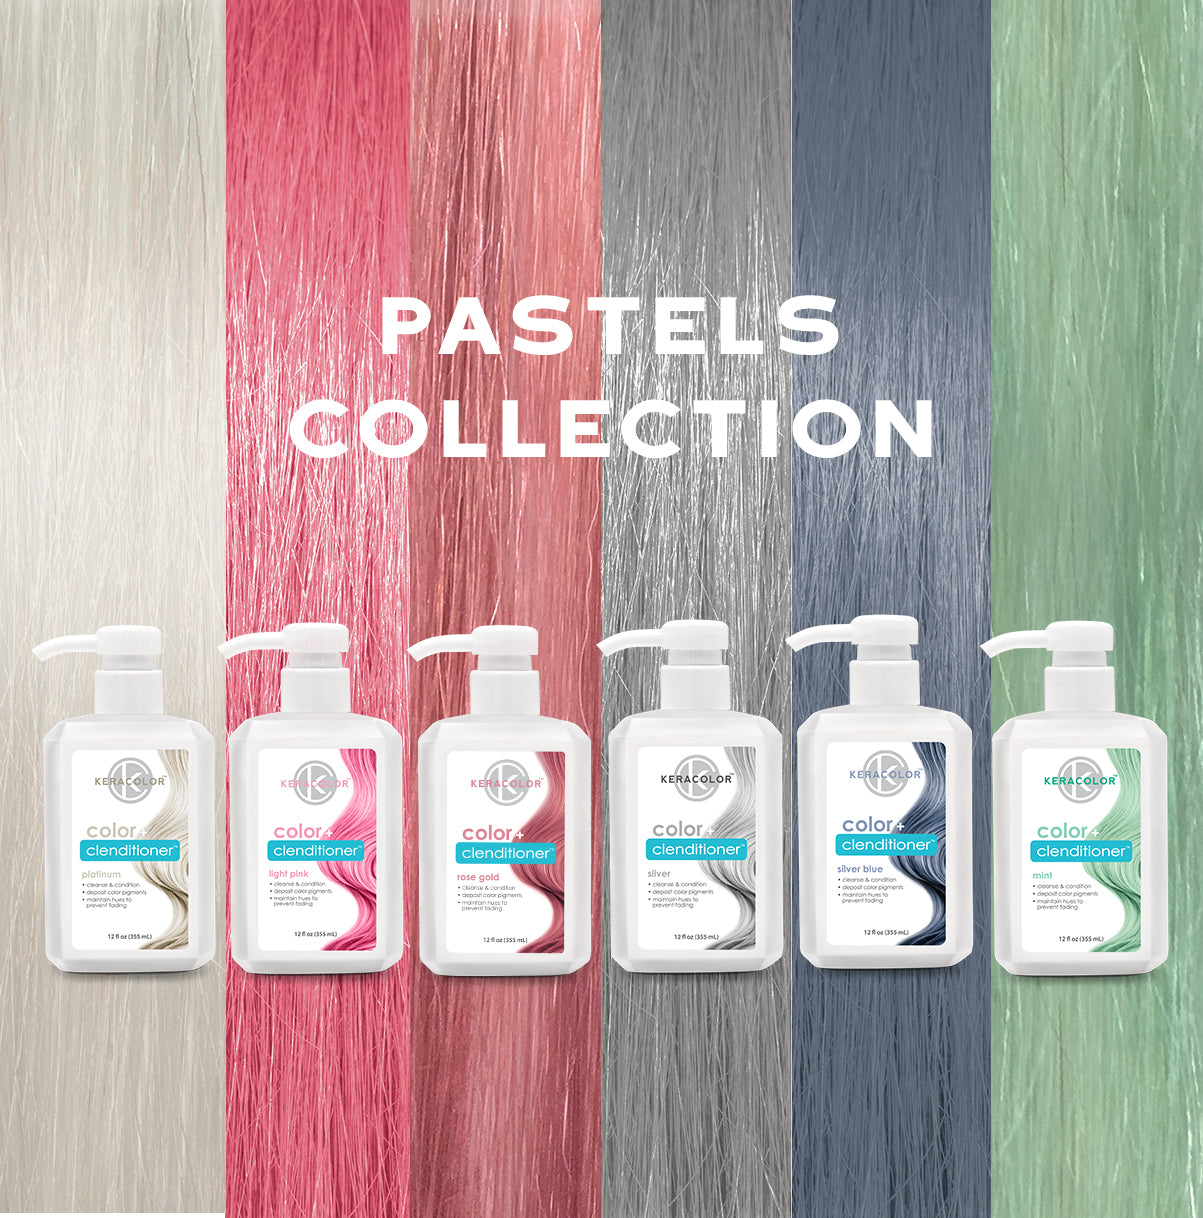 Karin | Pigment Decobrush | 12 Pastel Colors Collection